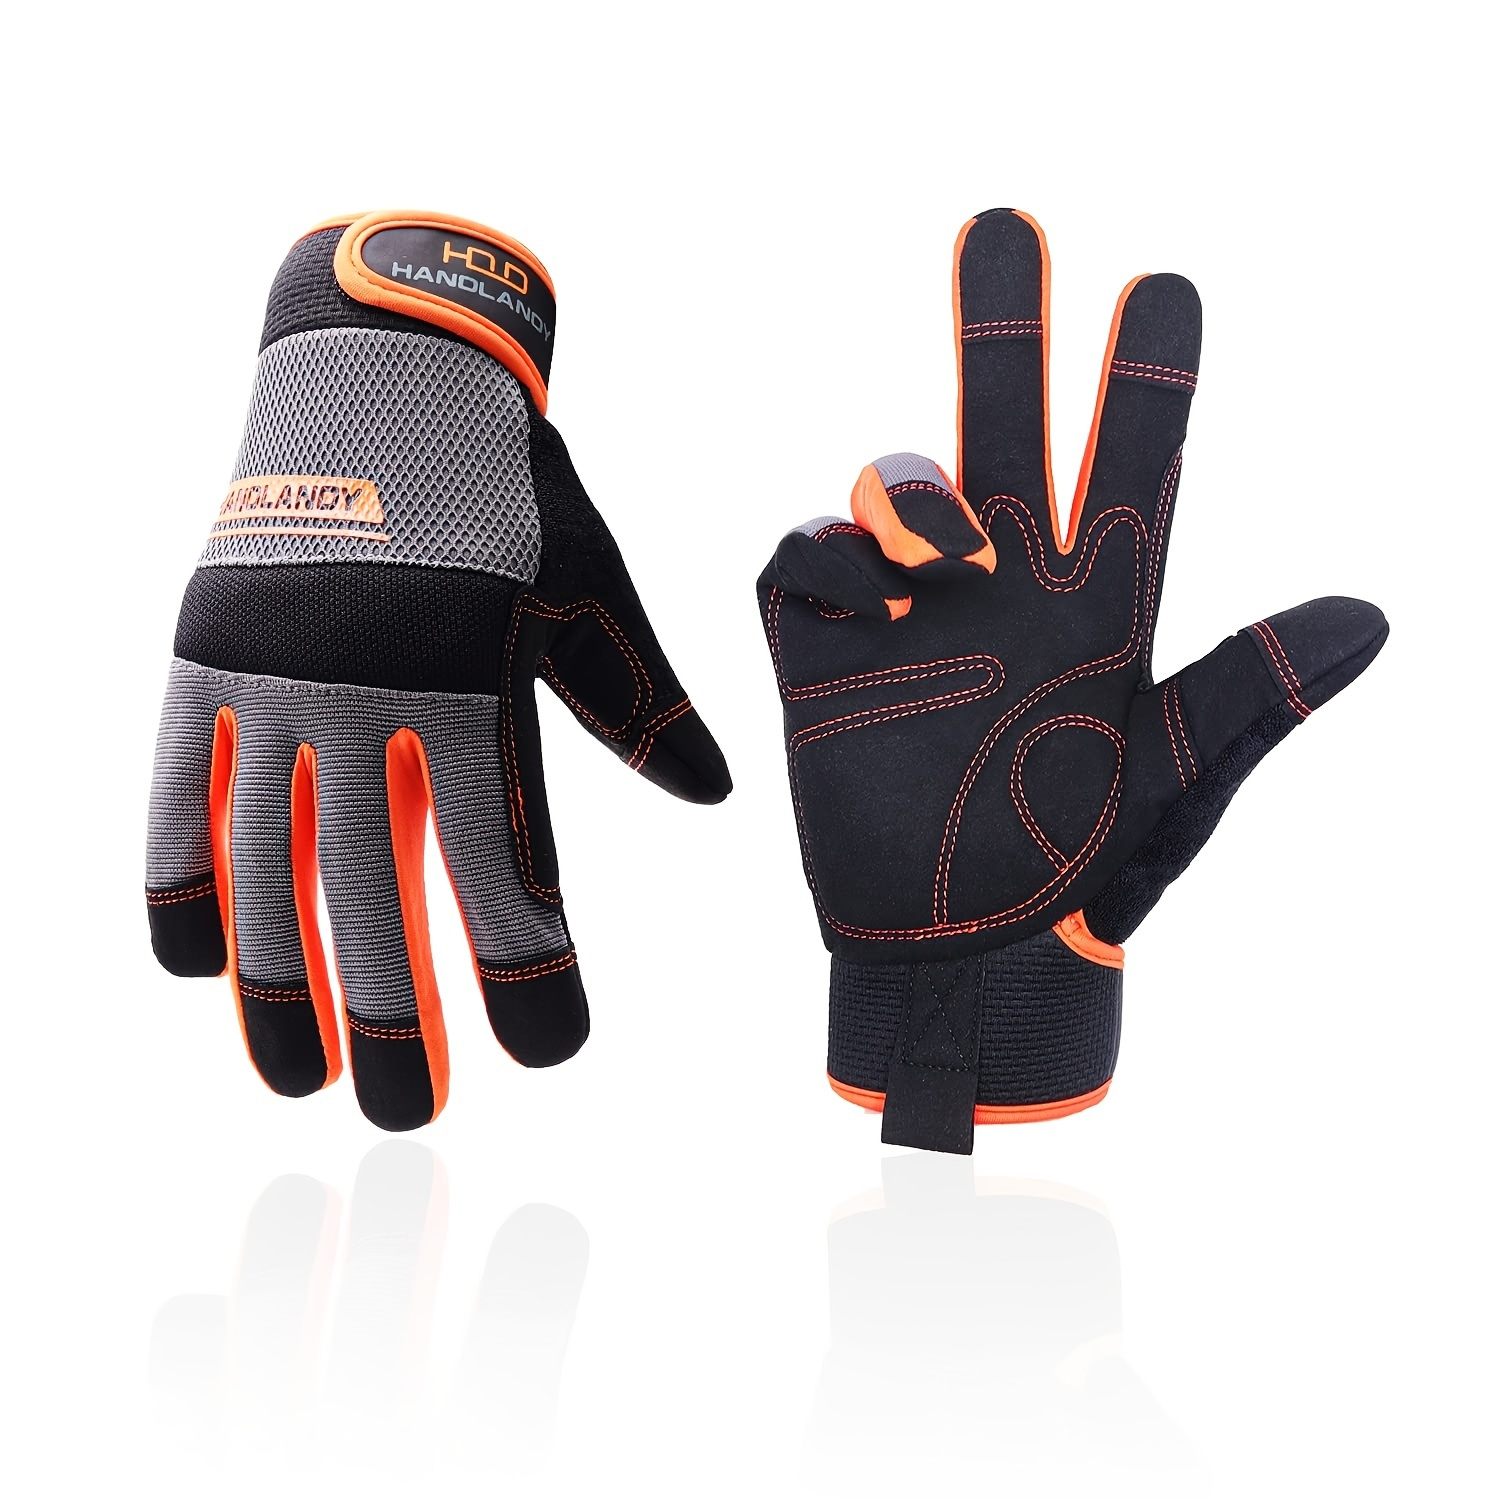 Mechanix Wear: Utility Work Gloves with Secure Fit, Touchscreen Capable,  High Dexterity, Synthetic Leather Glove for Multi-purpose Use, Work Gloves